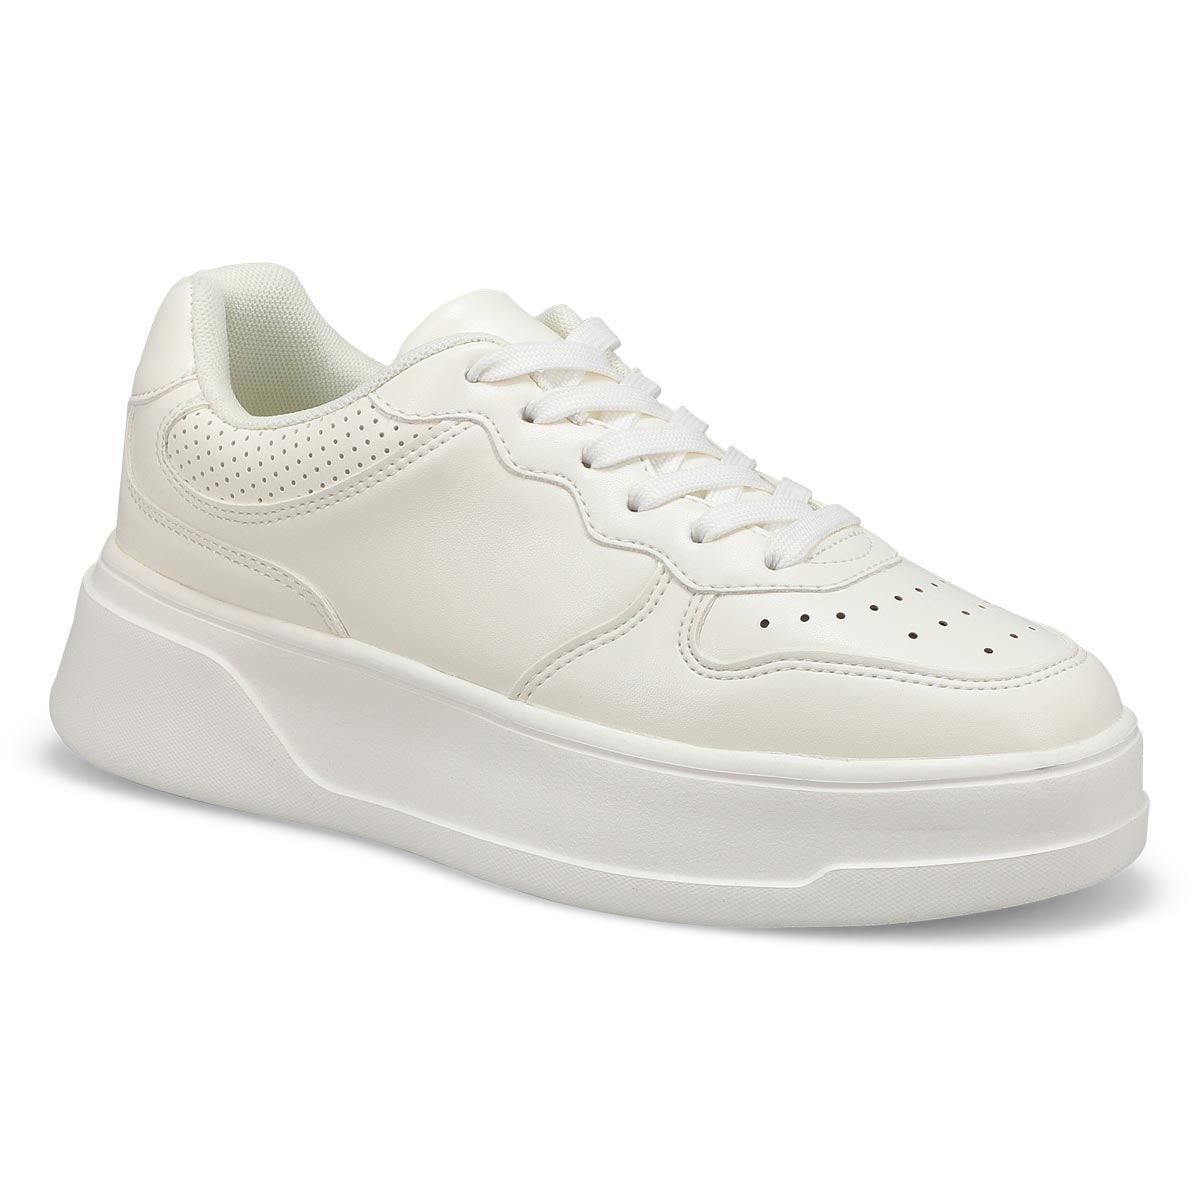 Womens Becket Lace Up Sneaker - White